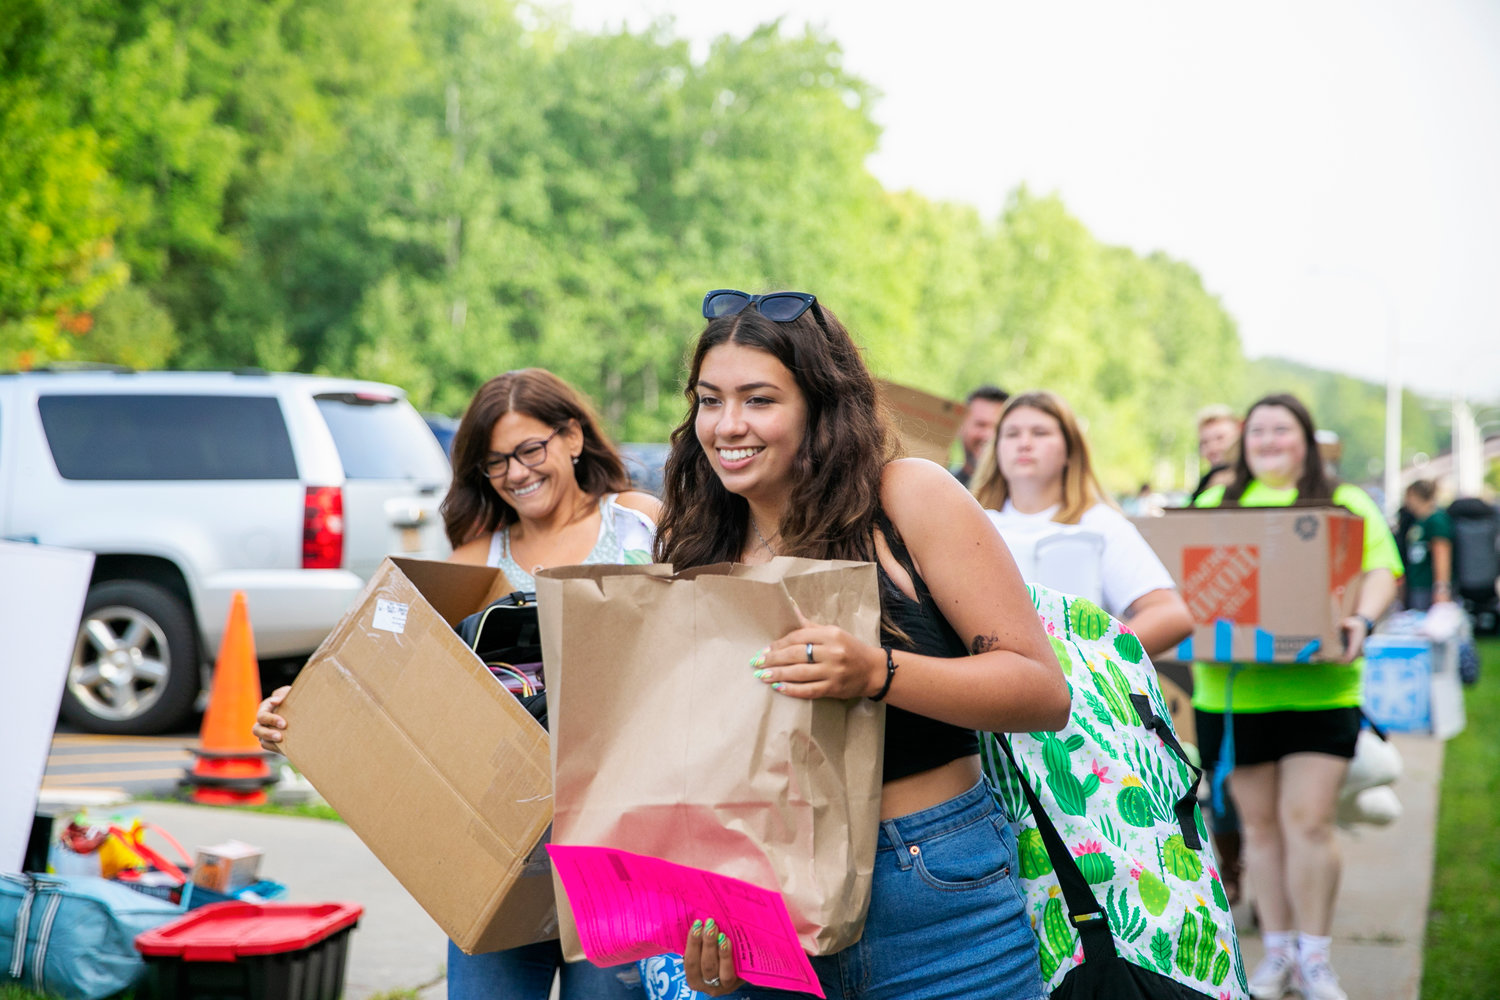 The SUNY Delhi campus welcomes roughly 900 new residential and commuting students this fall. Additionally, over 200 new students will be studying online, bringing the total of the incoming cohort to over 1,100 students.